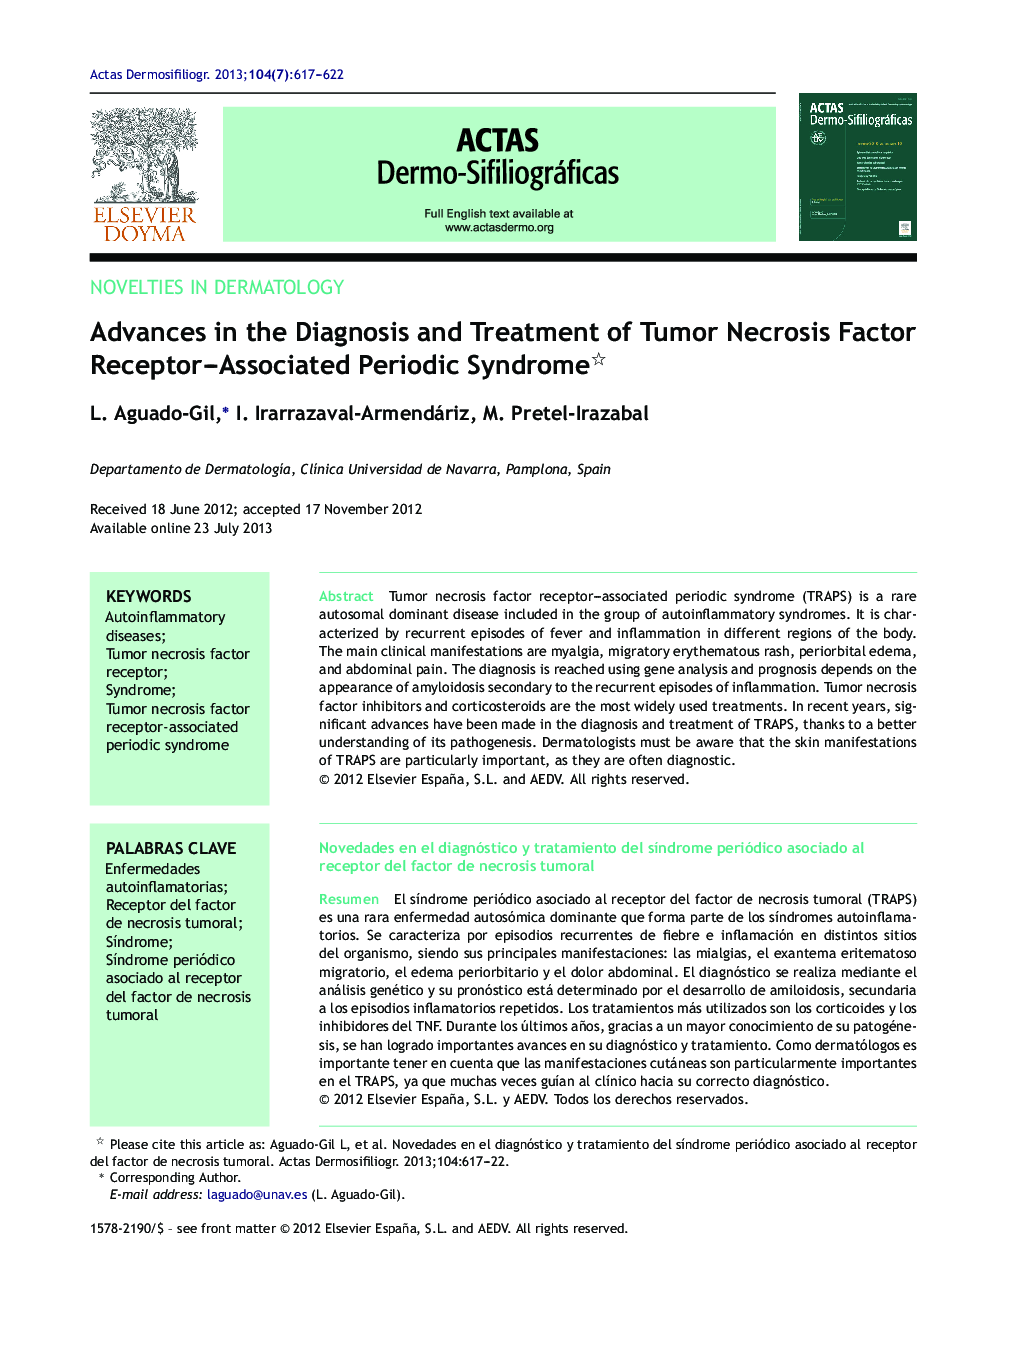 Advances in the Diagnosis and Treatment of Tumor Necrosis Factor Receptor-Associated Periodic Syndrome